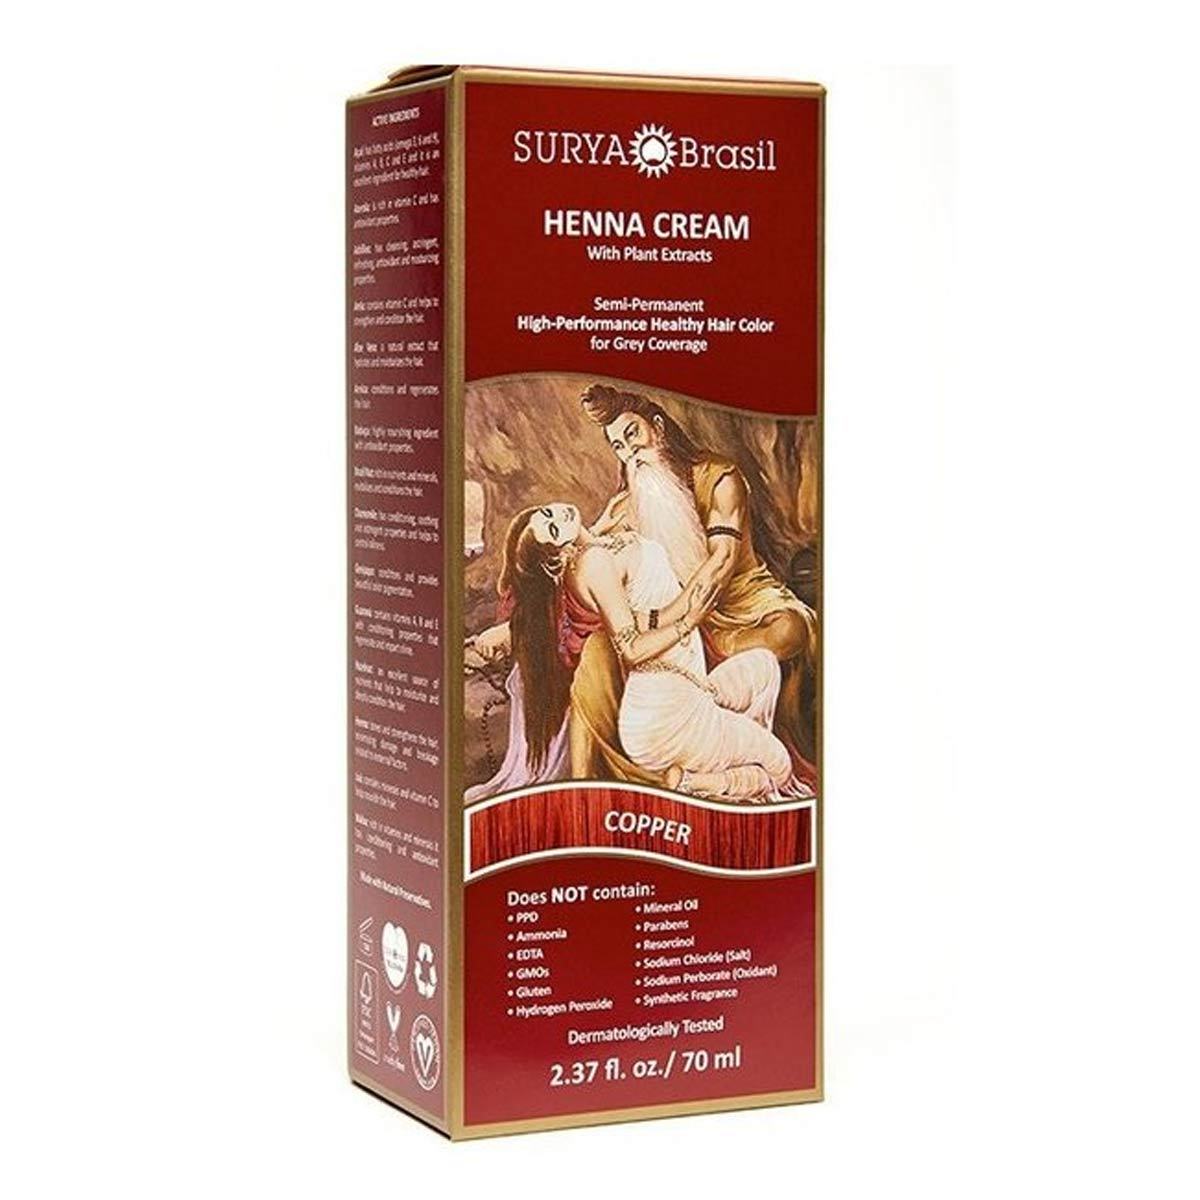 Primary image of Copper Henna Hair Color